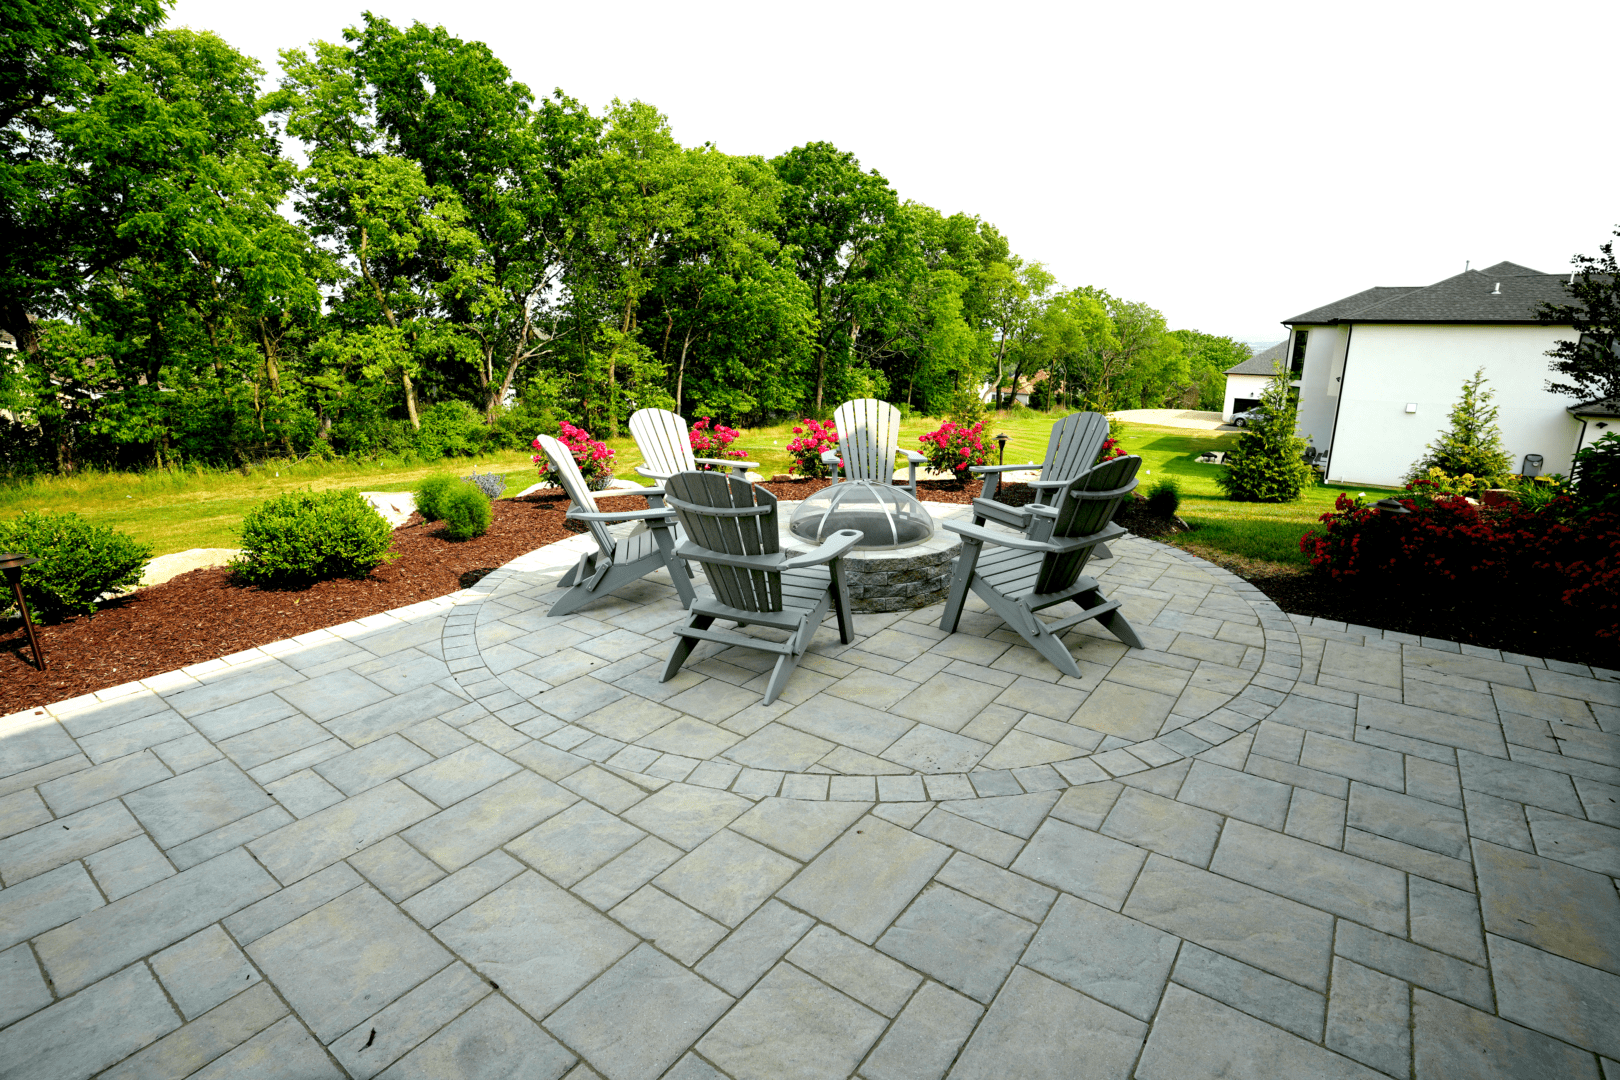 A hardscape design featuring a patio adorned with chairs and a fire pit.